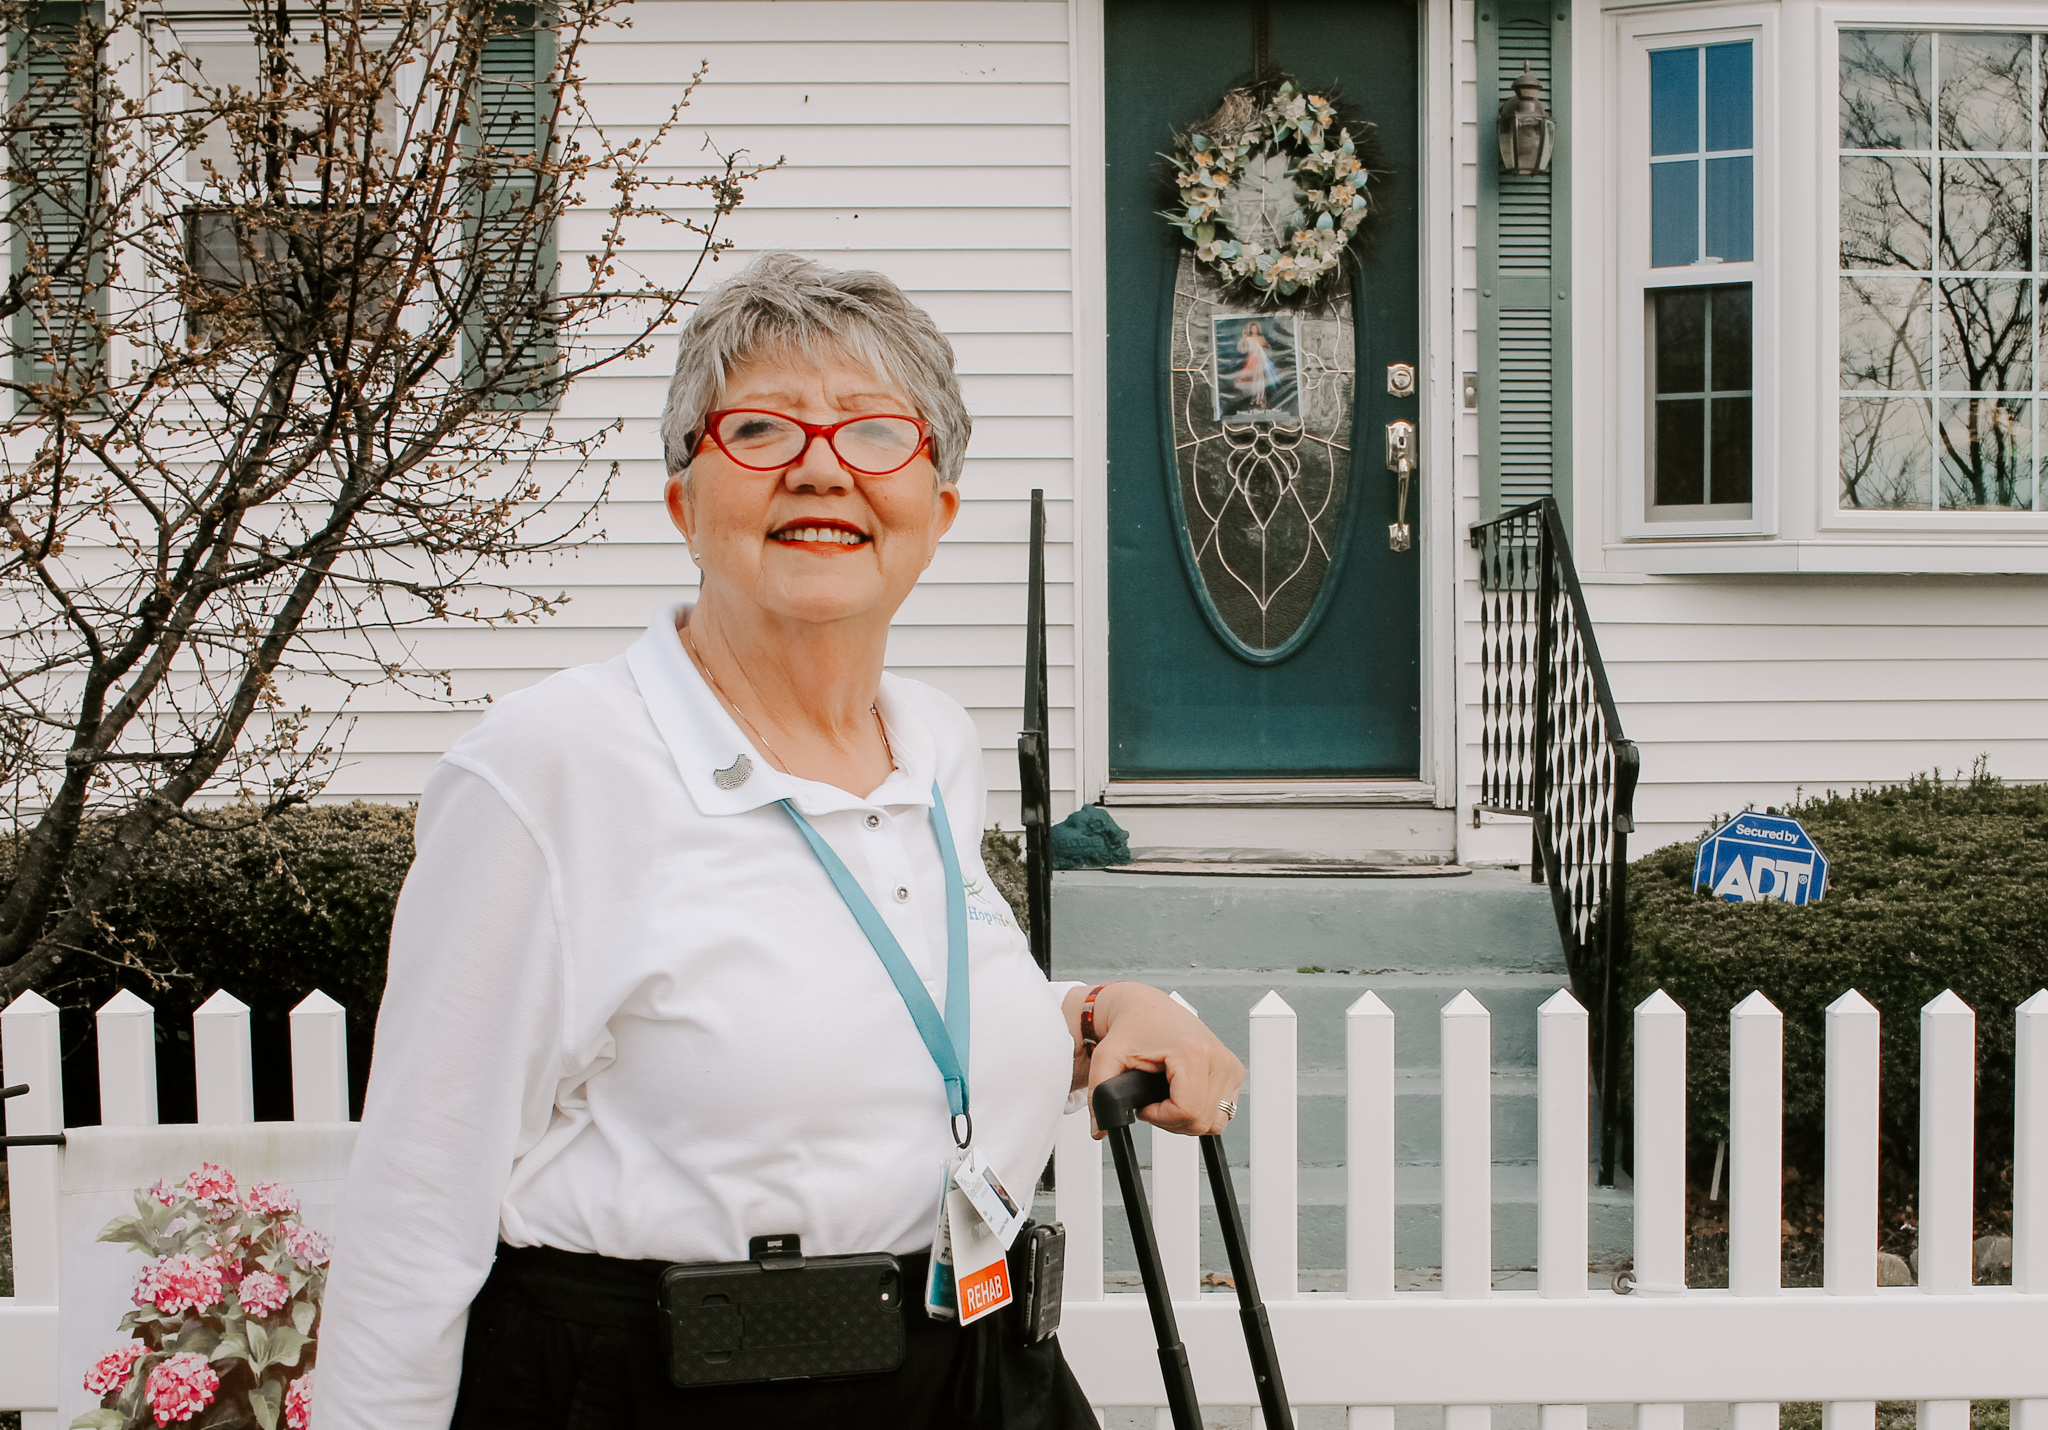 Home health care occupational therapist stands in front of white picket fence before she heads into her patients home to provide care